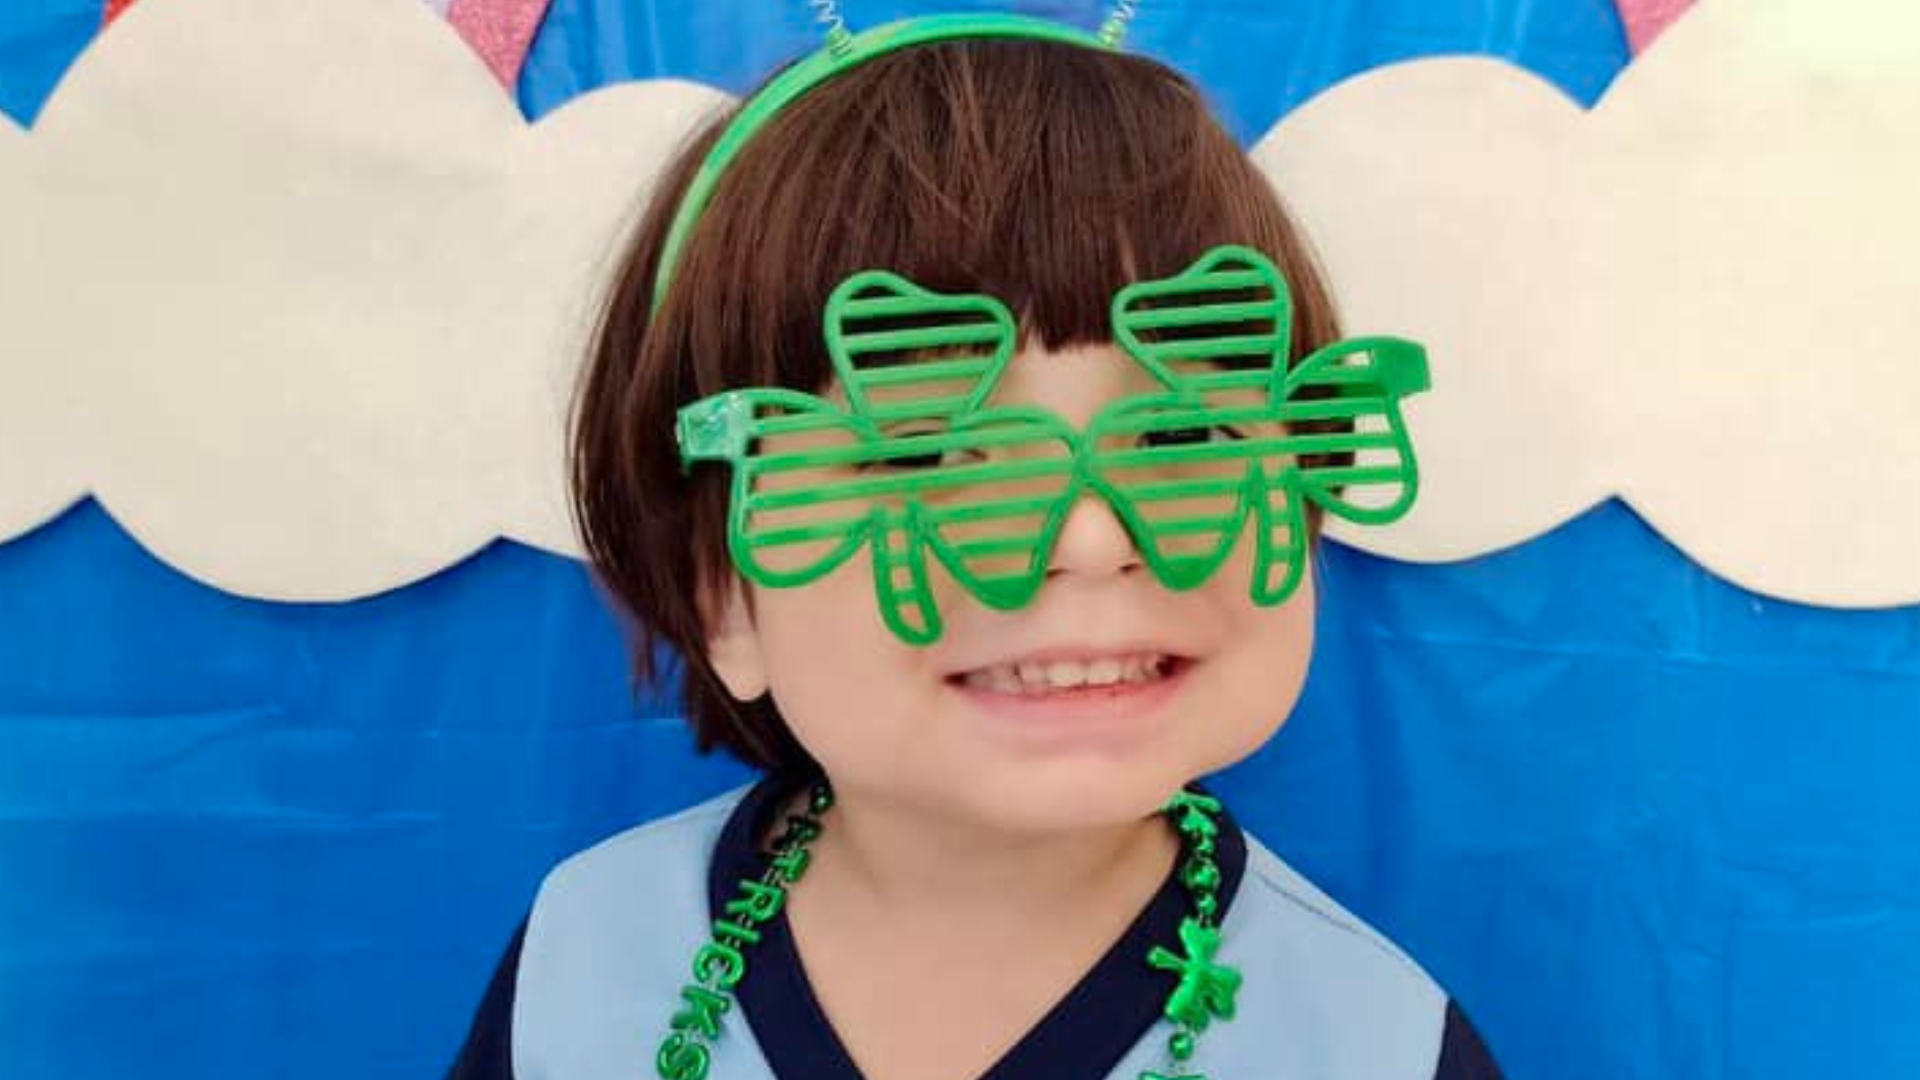 We celebrated St. Patricks Day at NBS